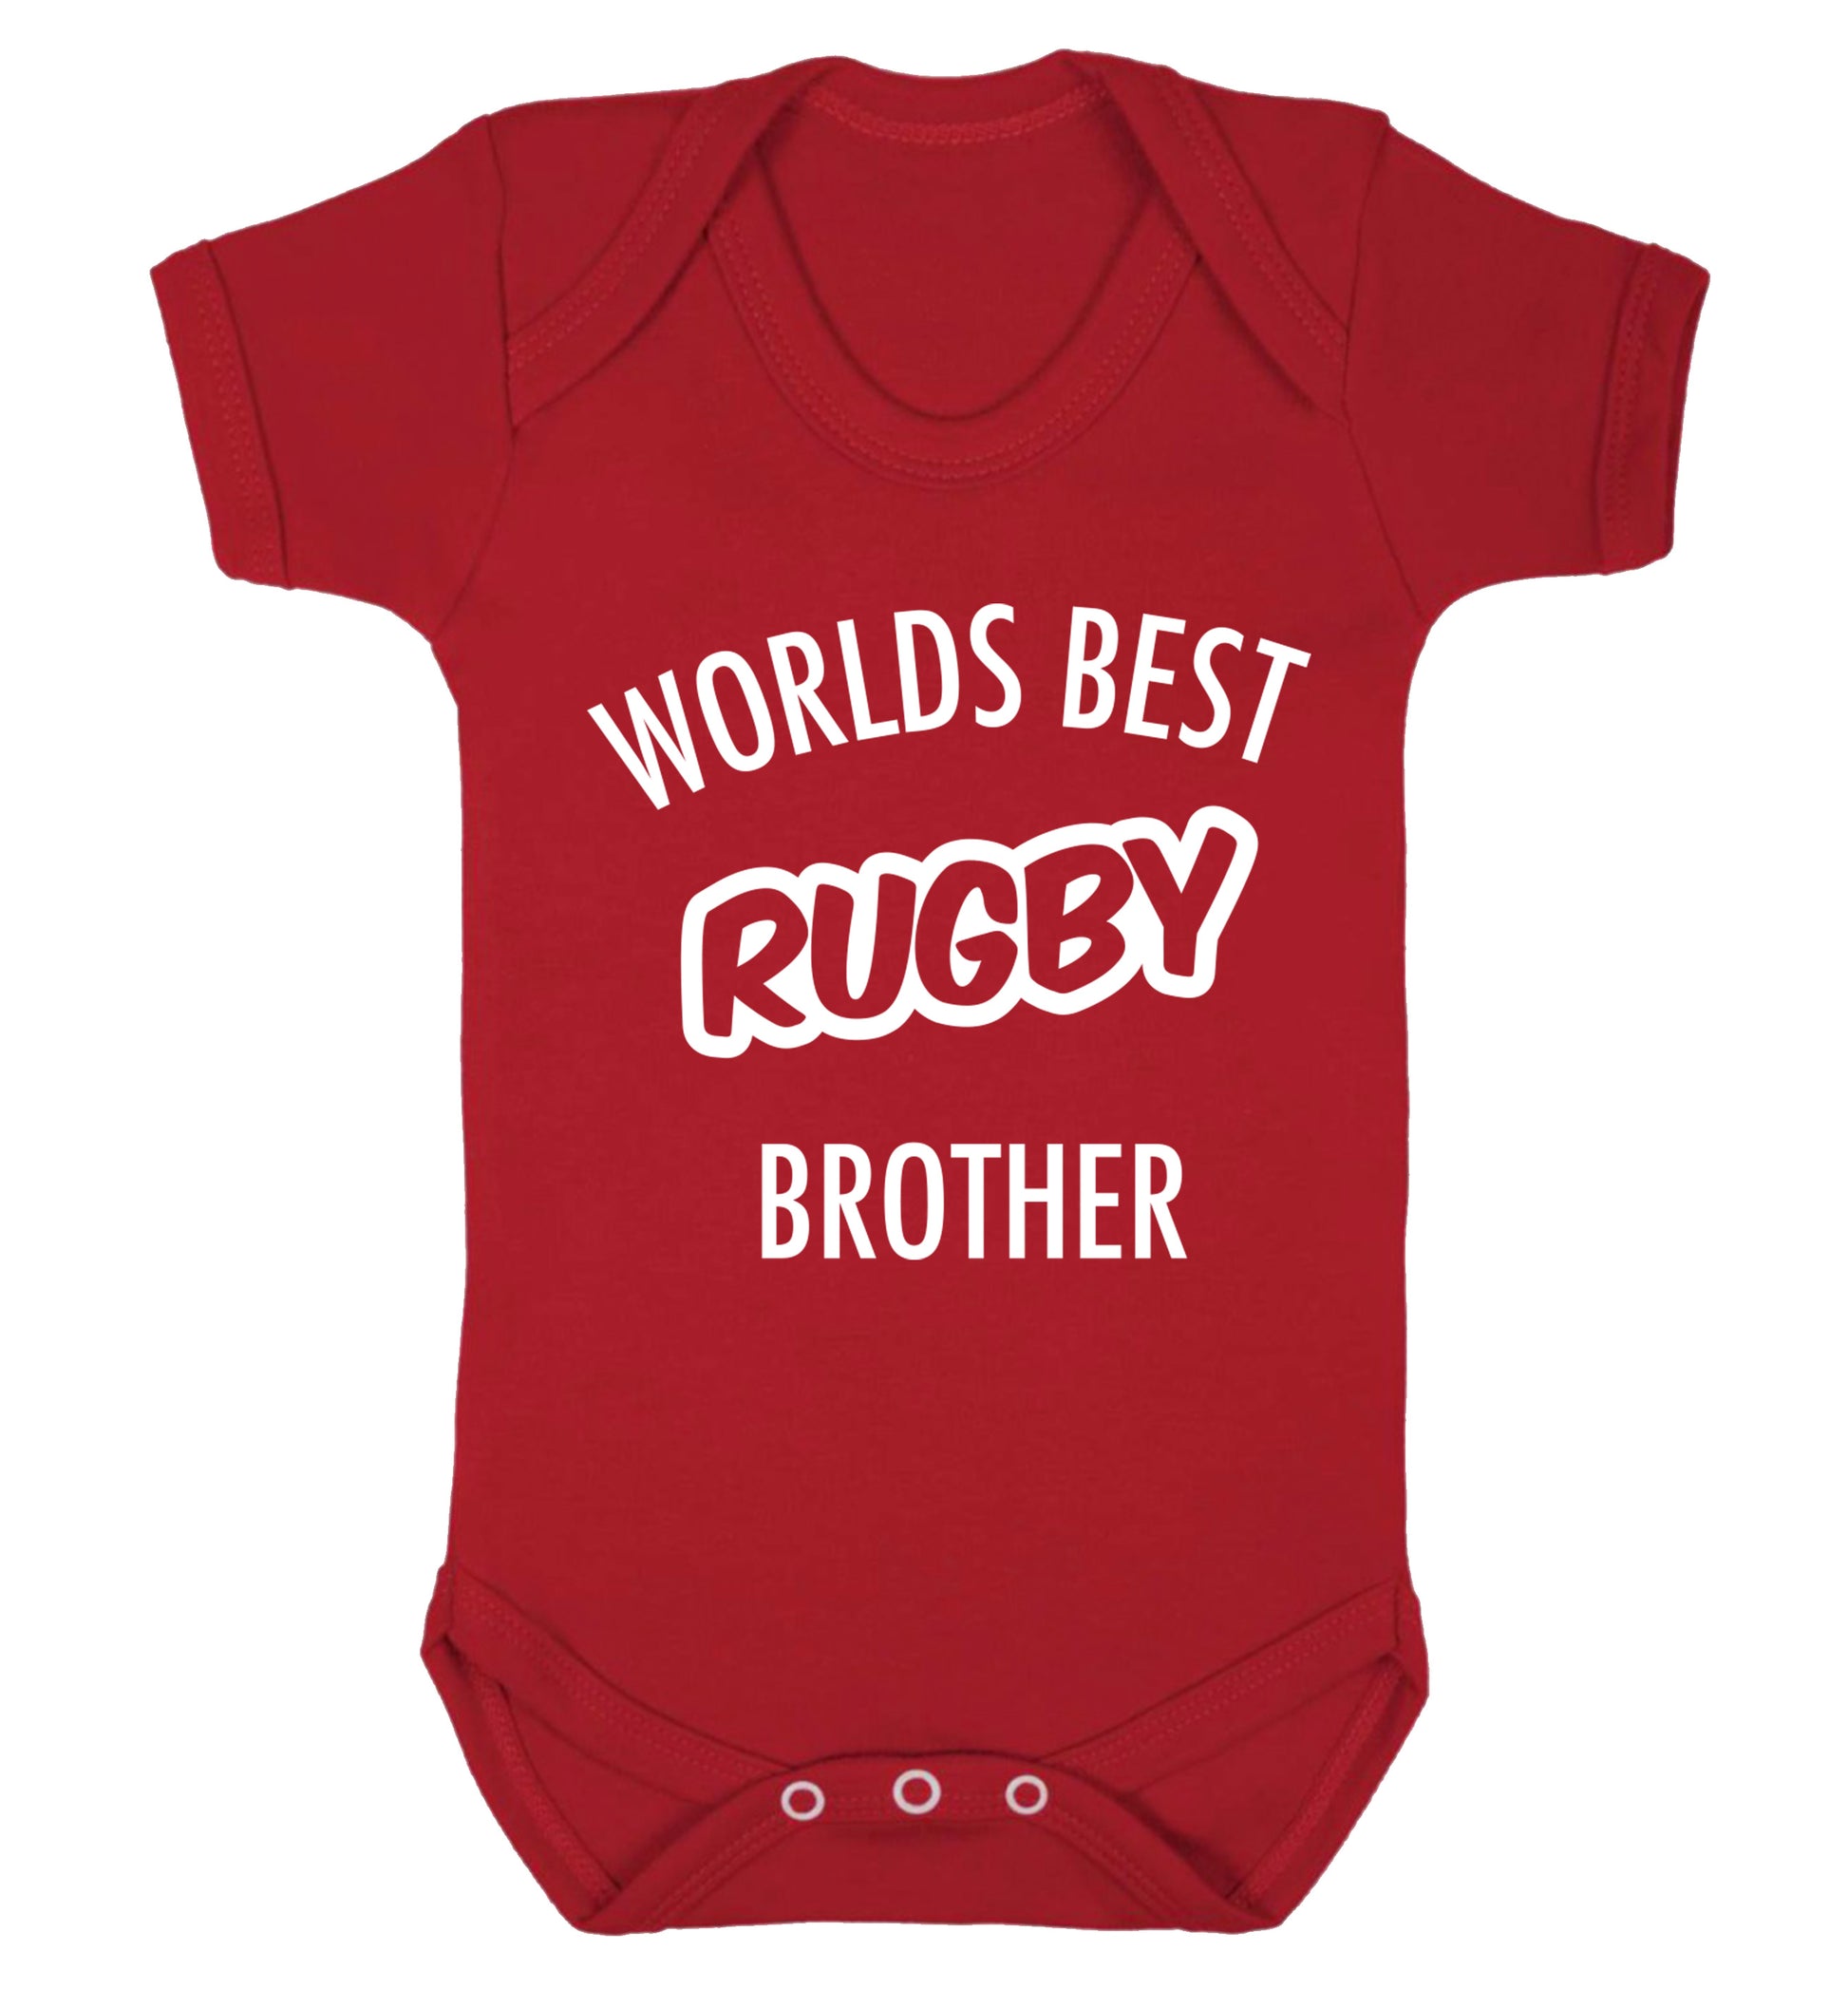 Worlds best rugby brother Baby Vest red 18-24 months